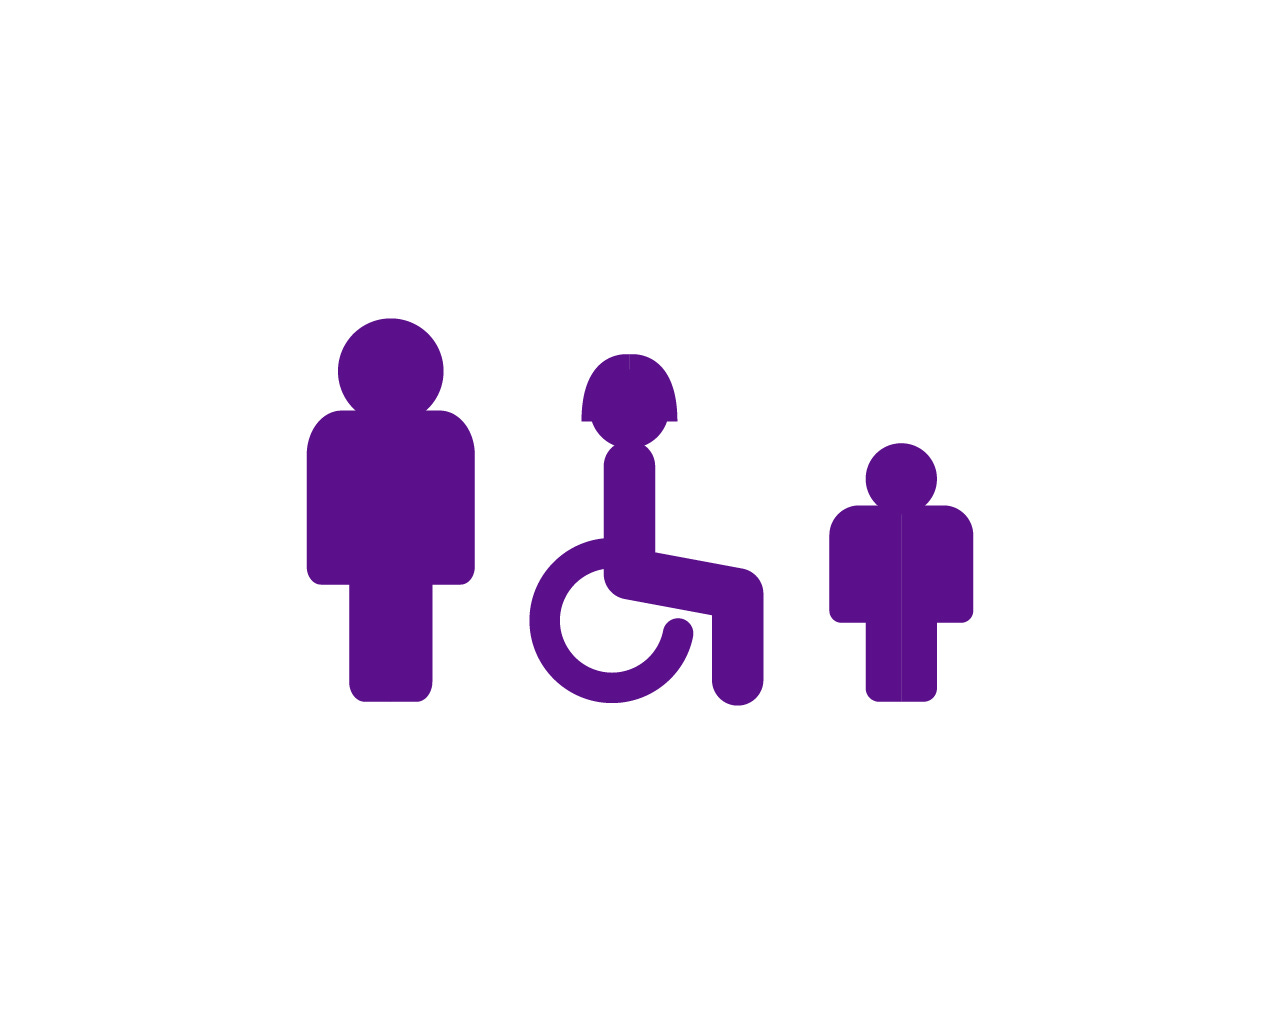 Three generic stick figures representing an adult man, a disabled adult woman, and a male child.